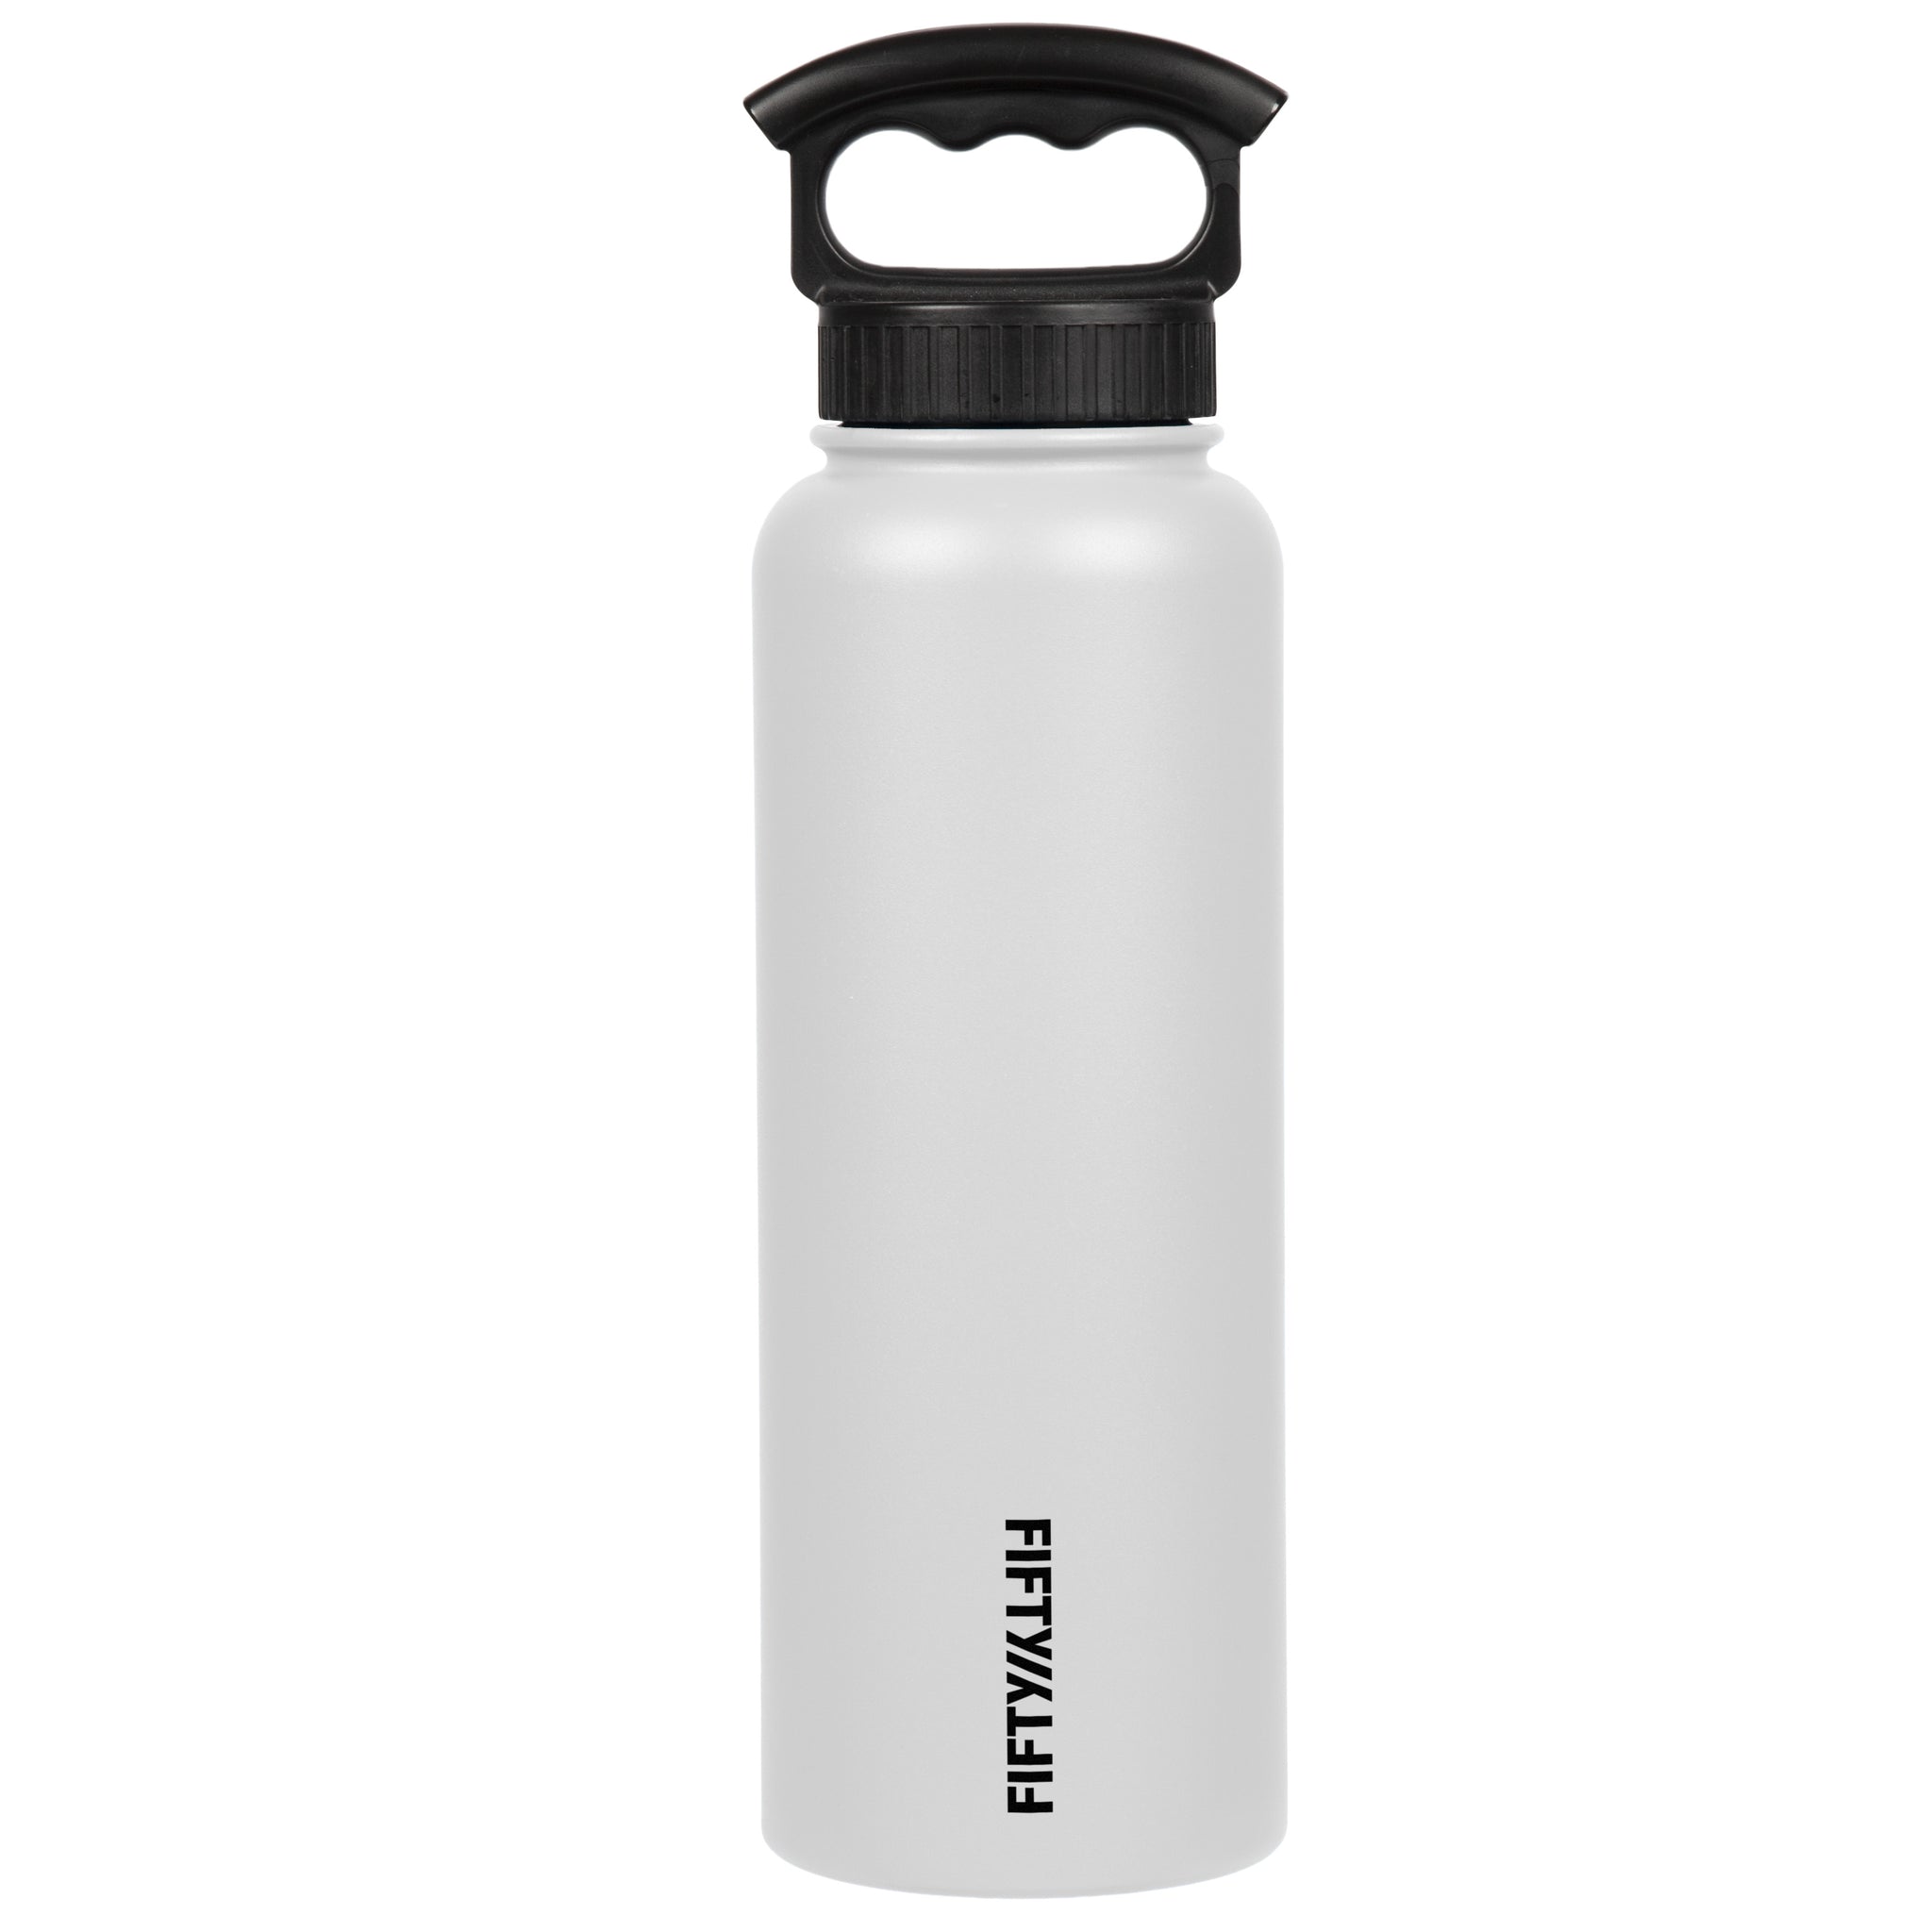 Thermoflask Double Stainless Steel Insulated Water Bottle with Two Lids, 40  oz, White –